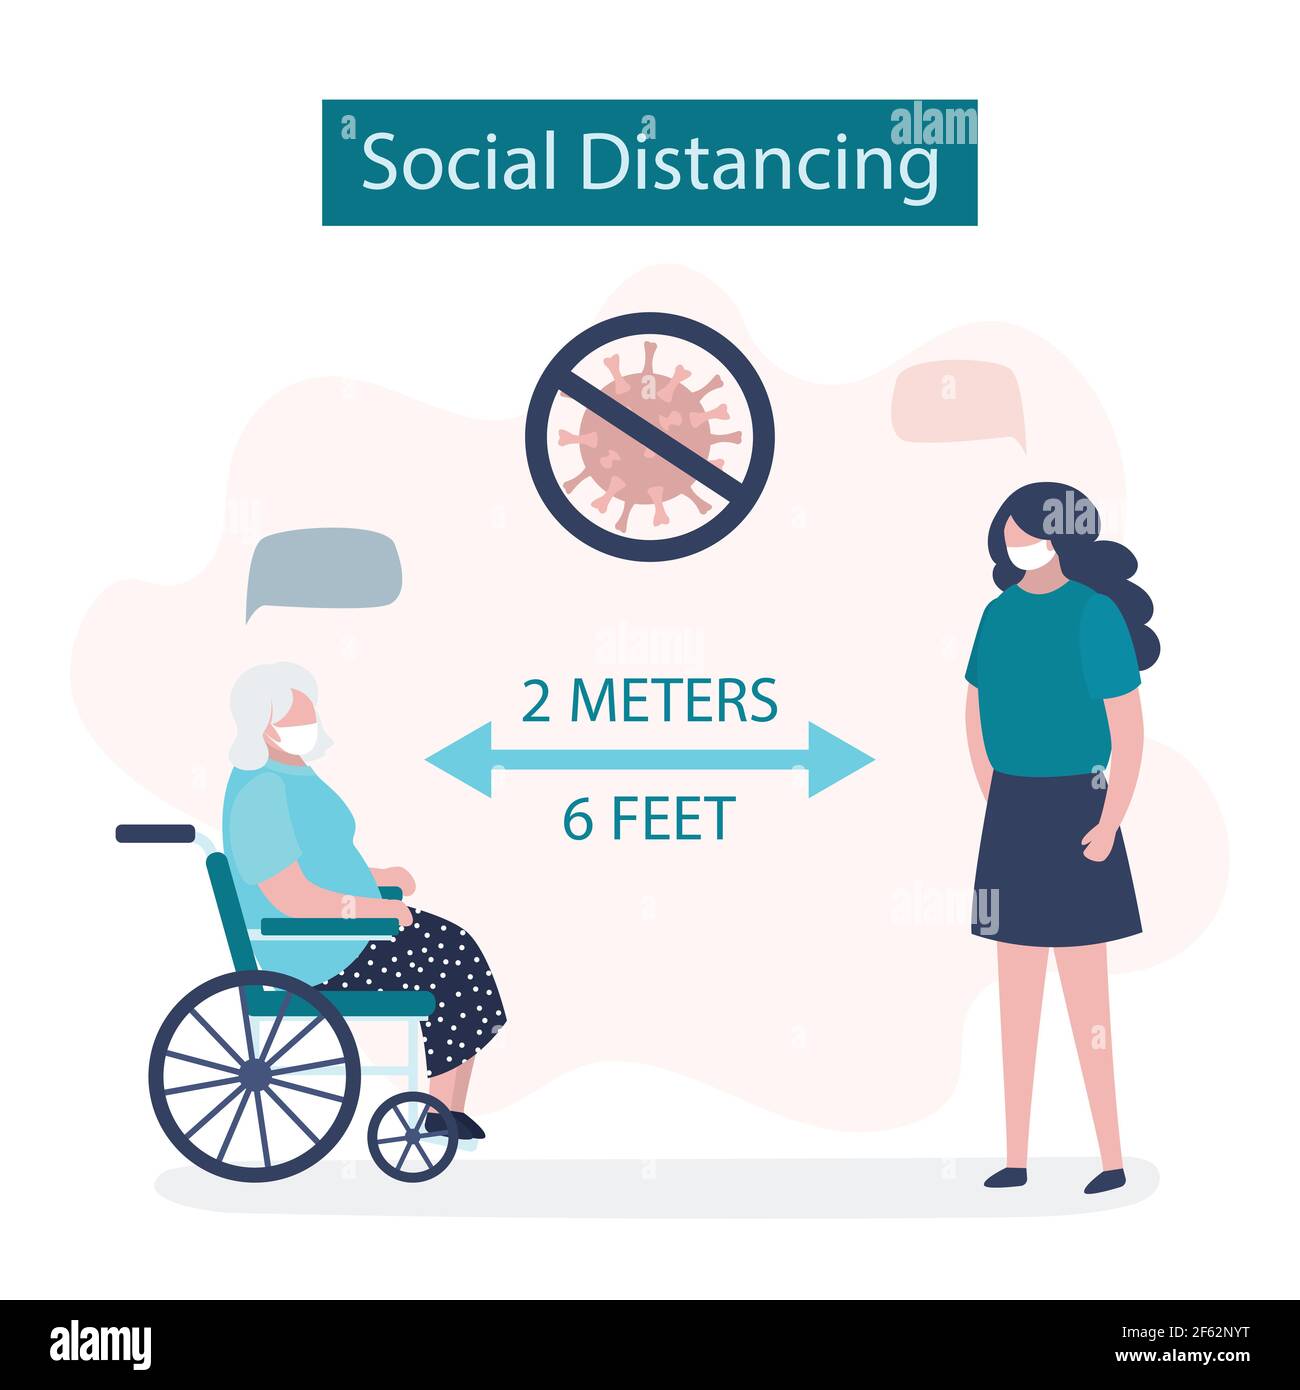 Social Distancing, two people keeping distance for infection risk and disease. 2 meters or 6 feet distance between humans. Covid-19 prevention banner. Stock Photo